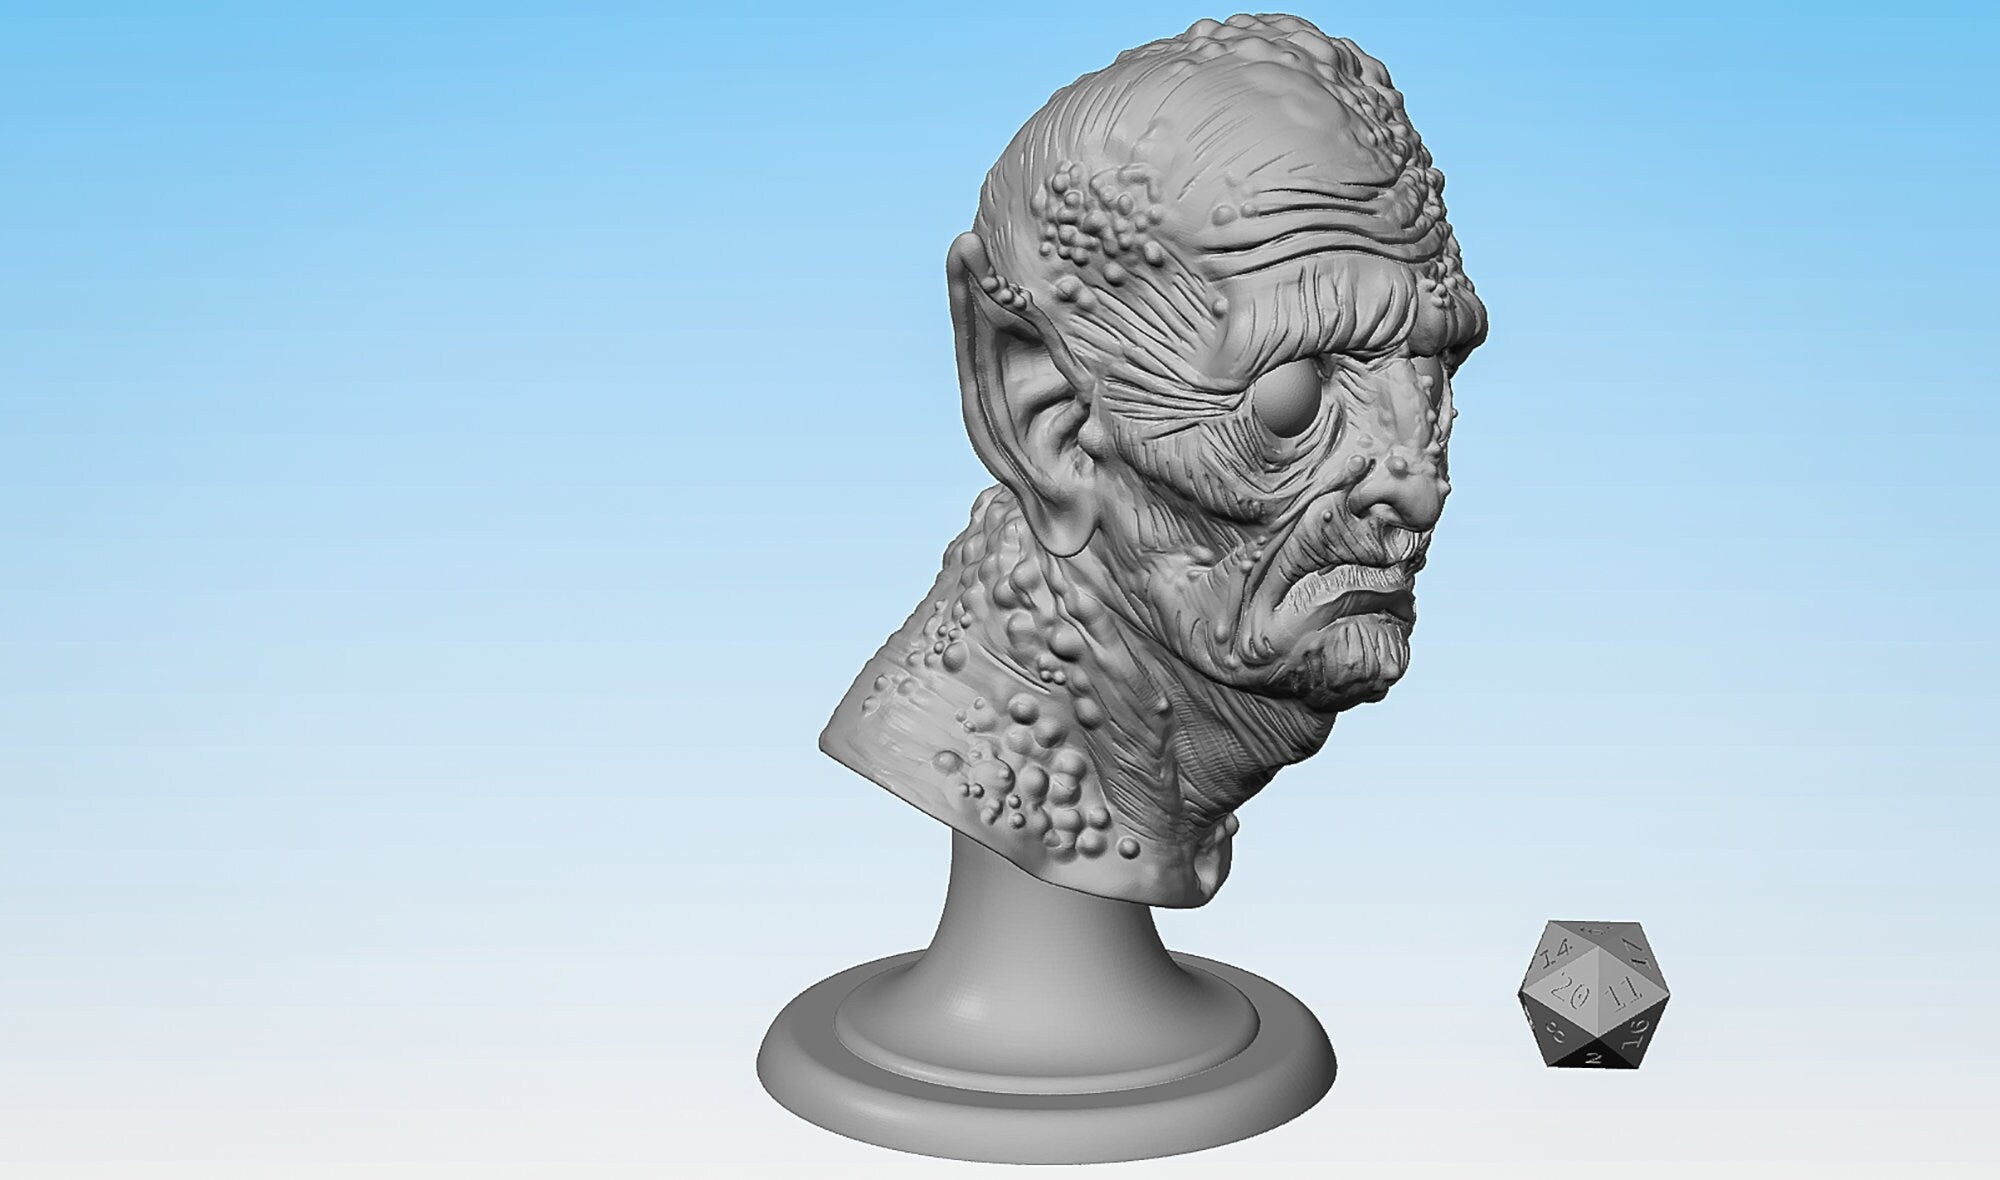 ZOMBIE BUST 15 cm | Figurine | Collectors | Lord of the Rings | Dungeons & Dragons | Pathfinder | 3D Print | Hero Size-Figurines